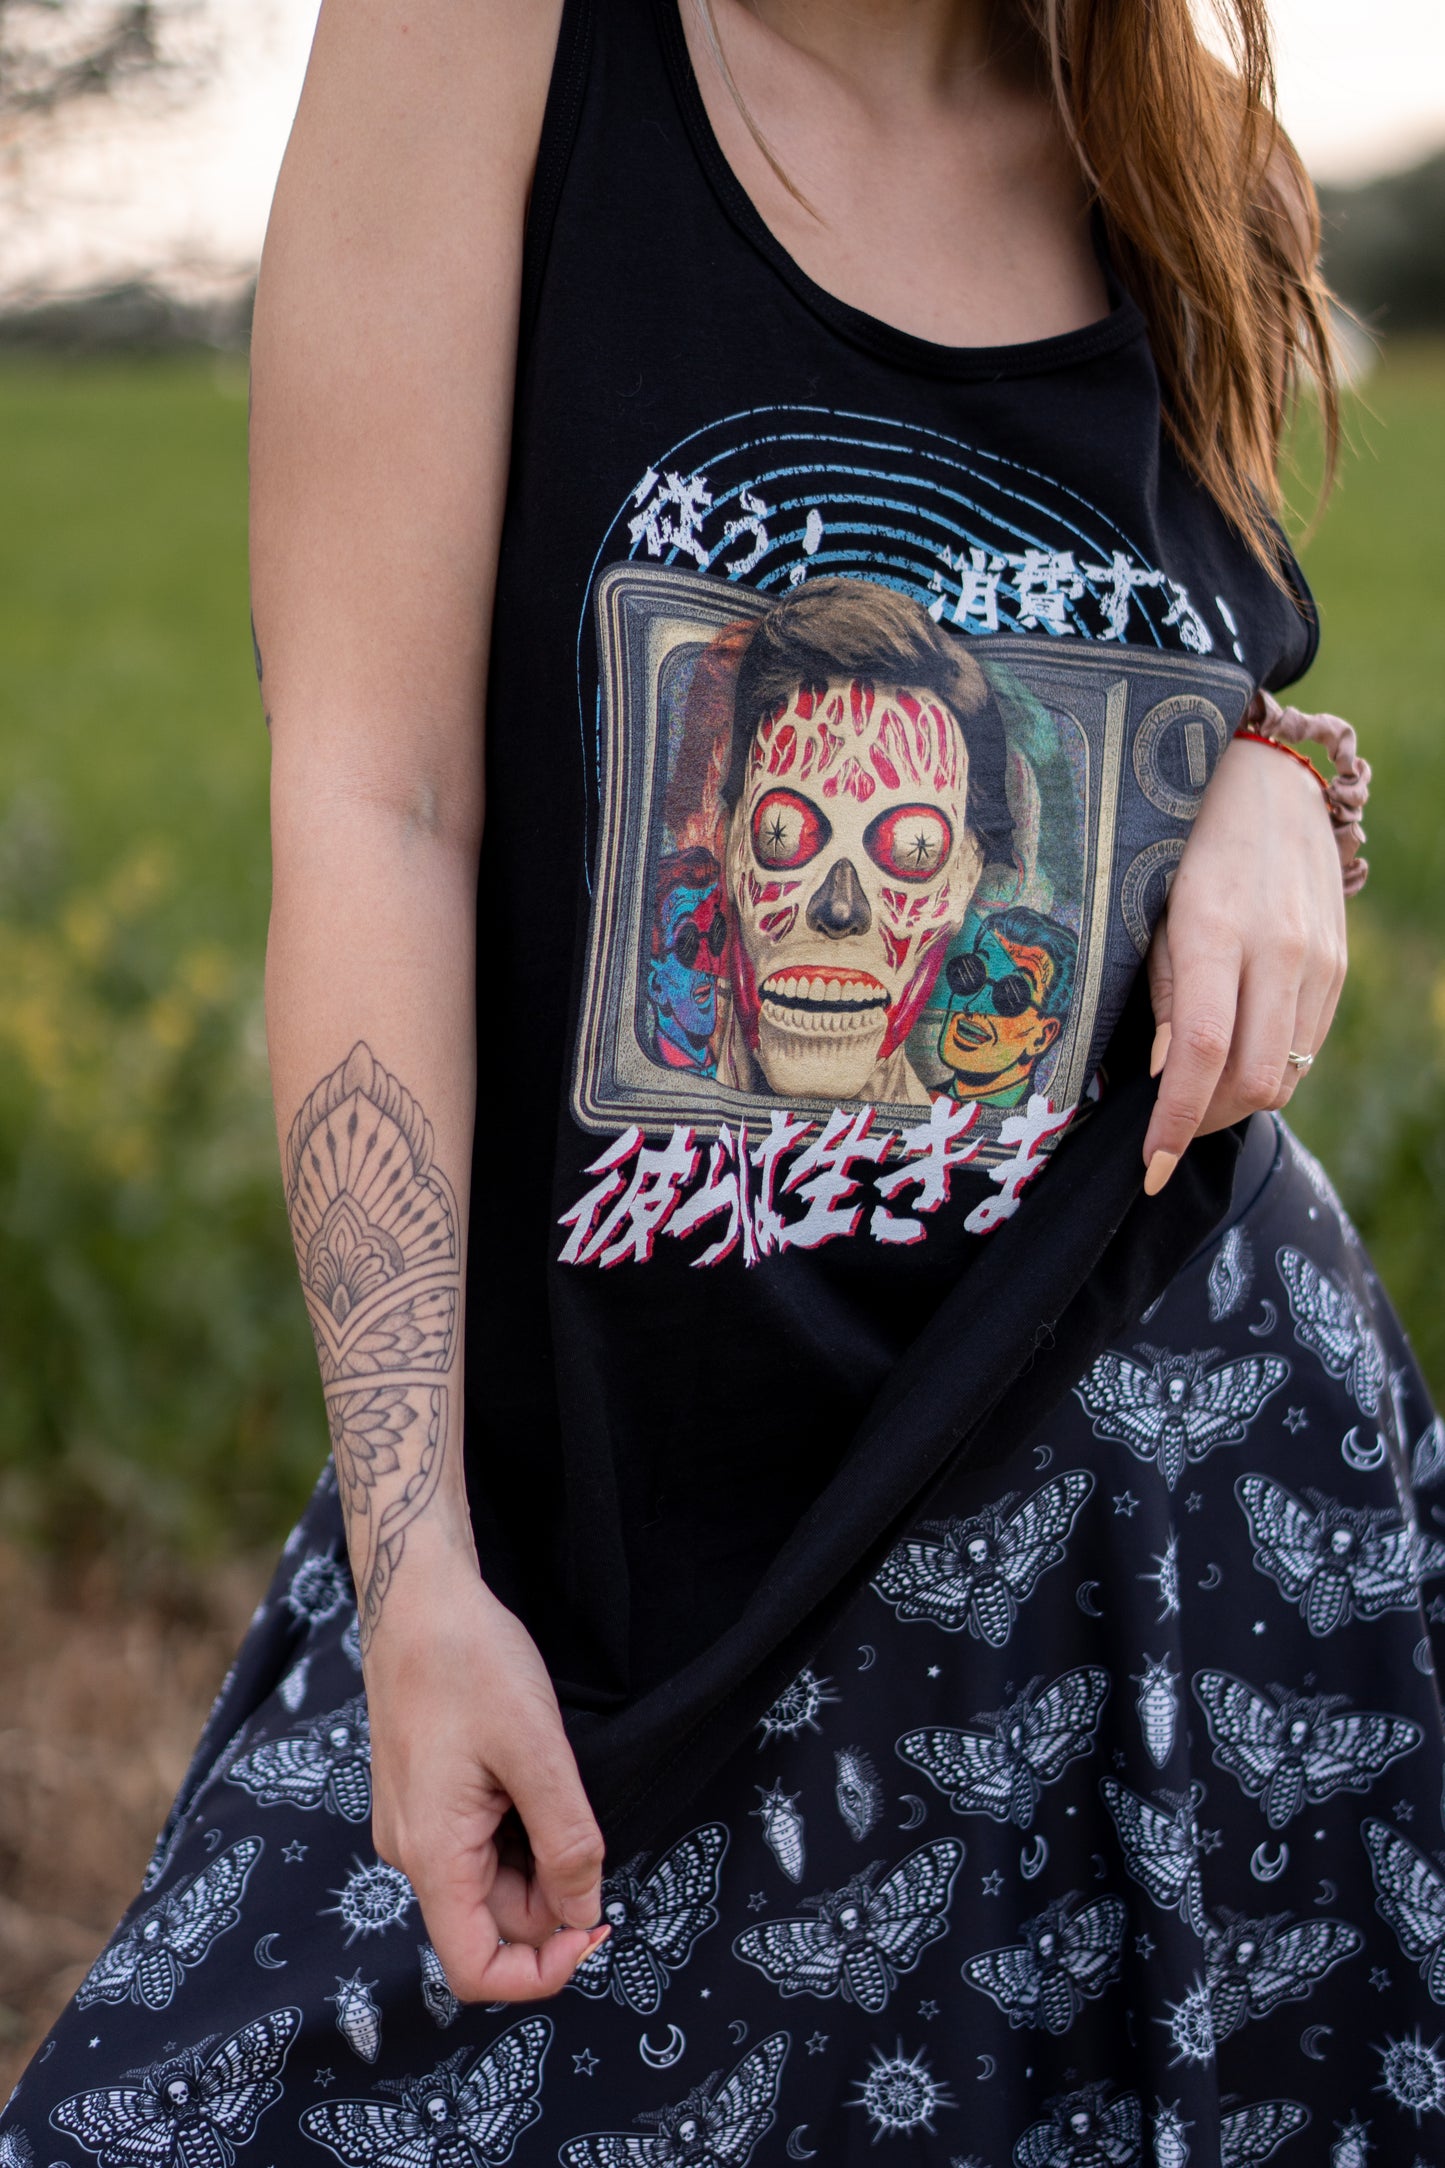 THEY LIVE! Brainwashed Horror Unisex Tank Top